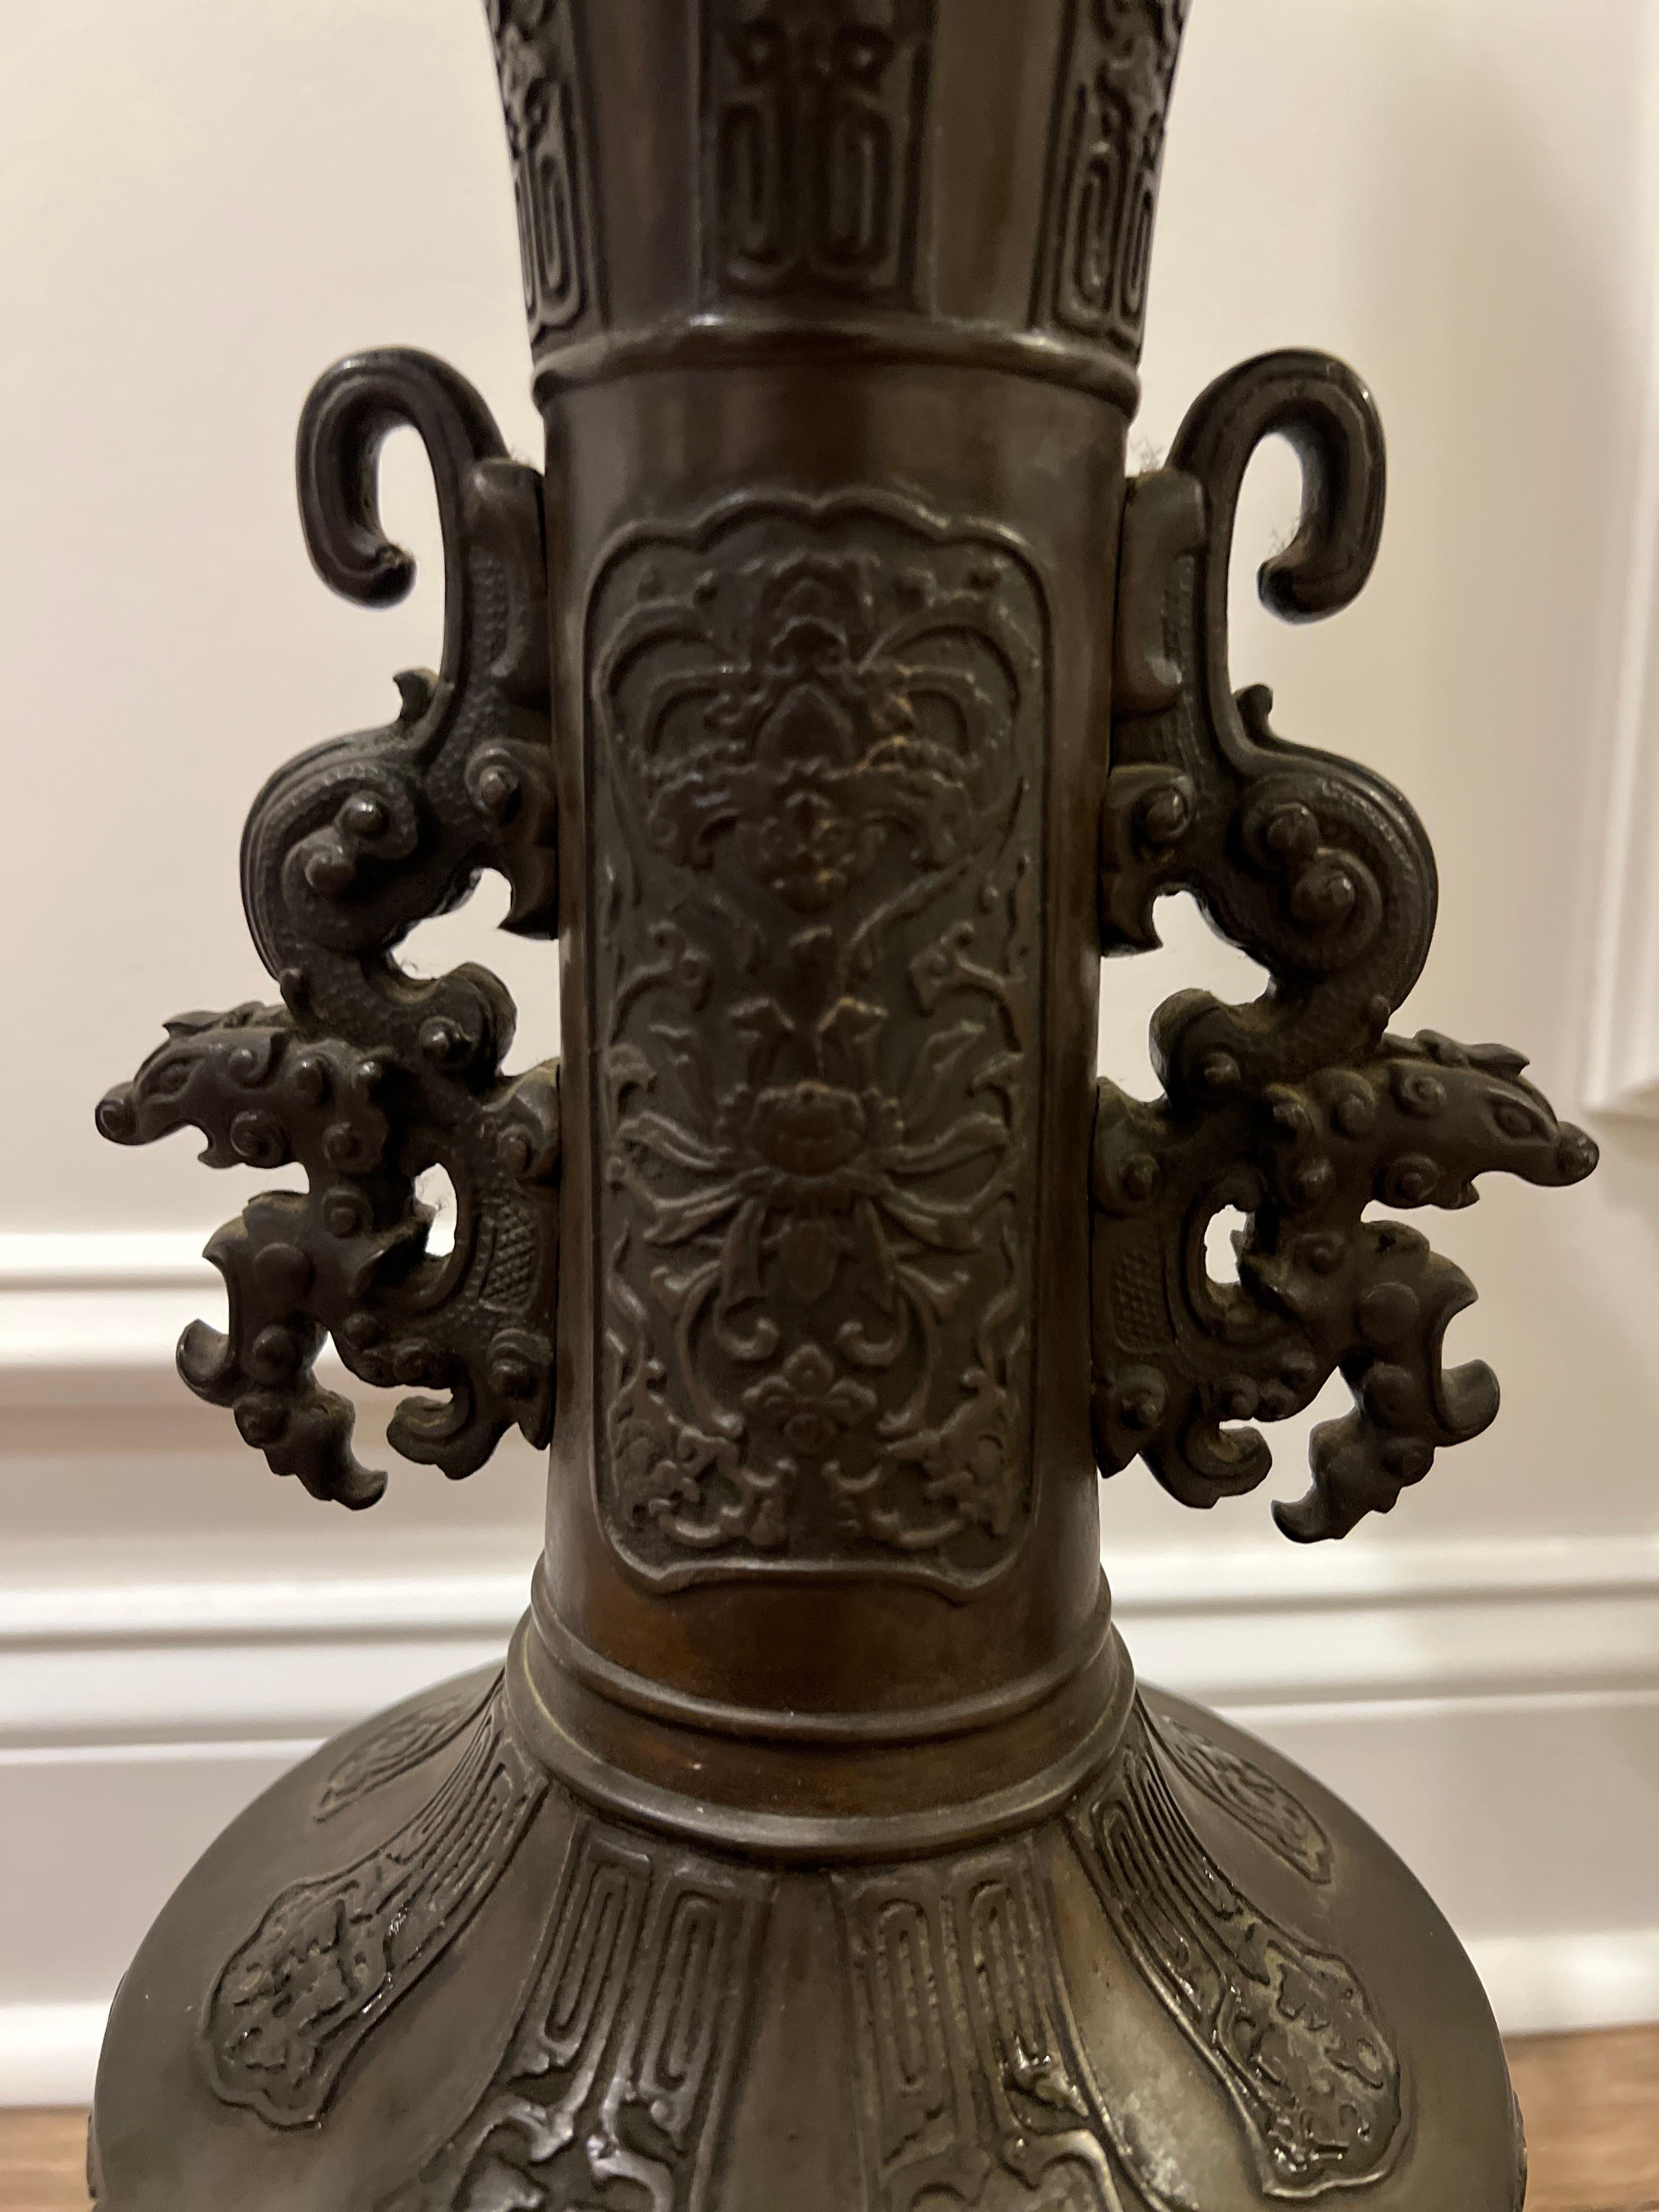 Japanese, circa 1900.

A pair of antique Japanese bronze table lamps. The lamps feature a detailed body showcasing applied lotus blossom and bird motifs to center, traditional Japanese motifs throughout and good quality guardian handles to